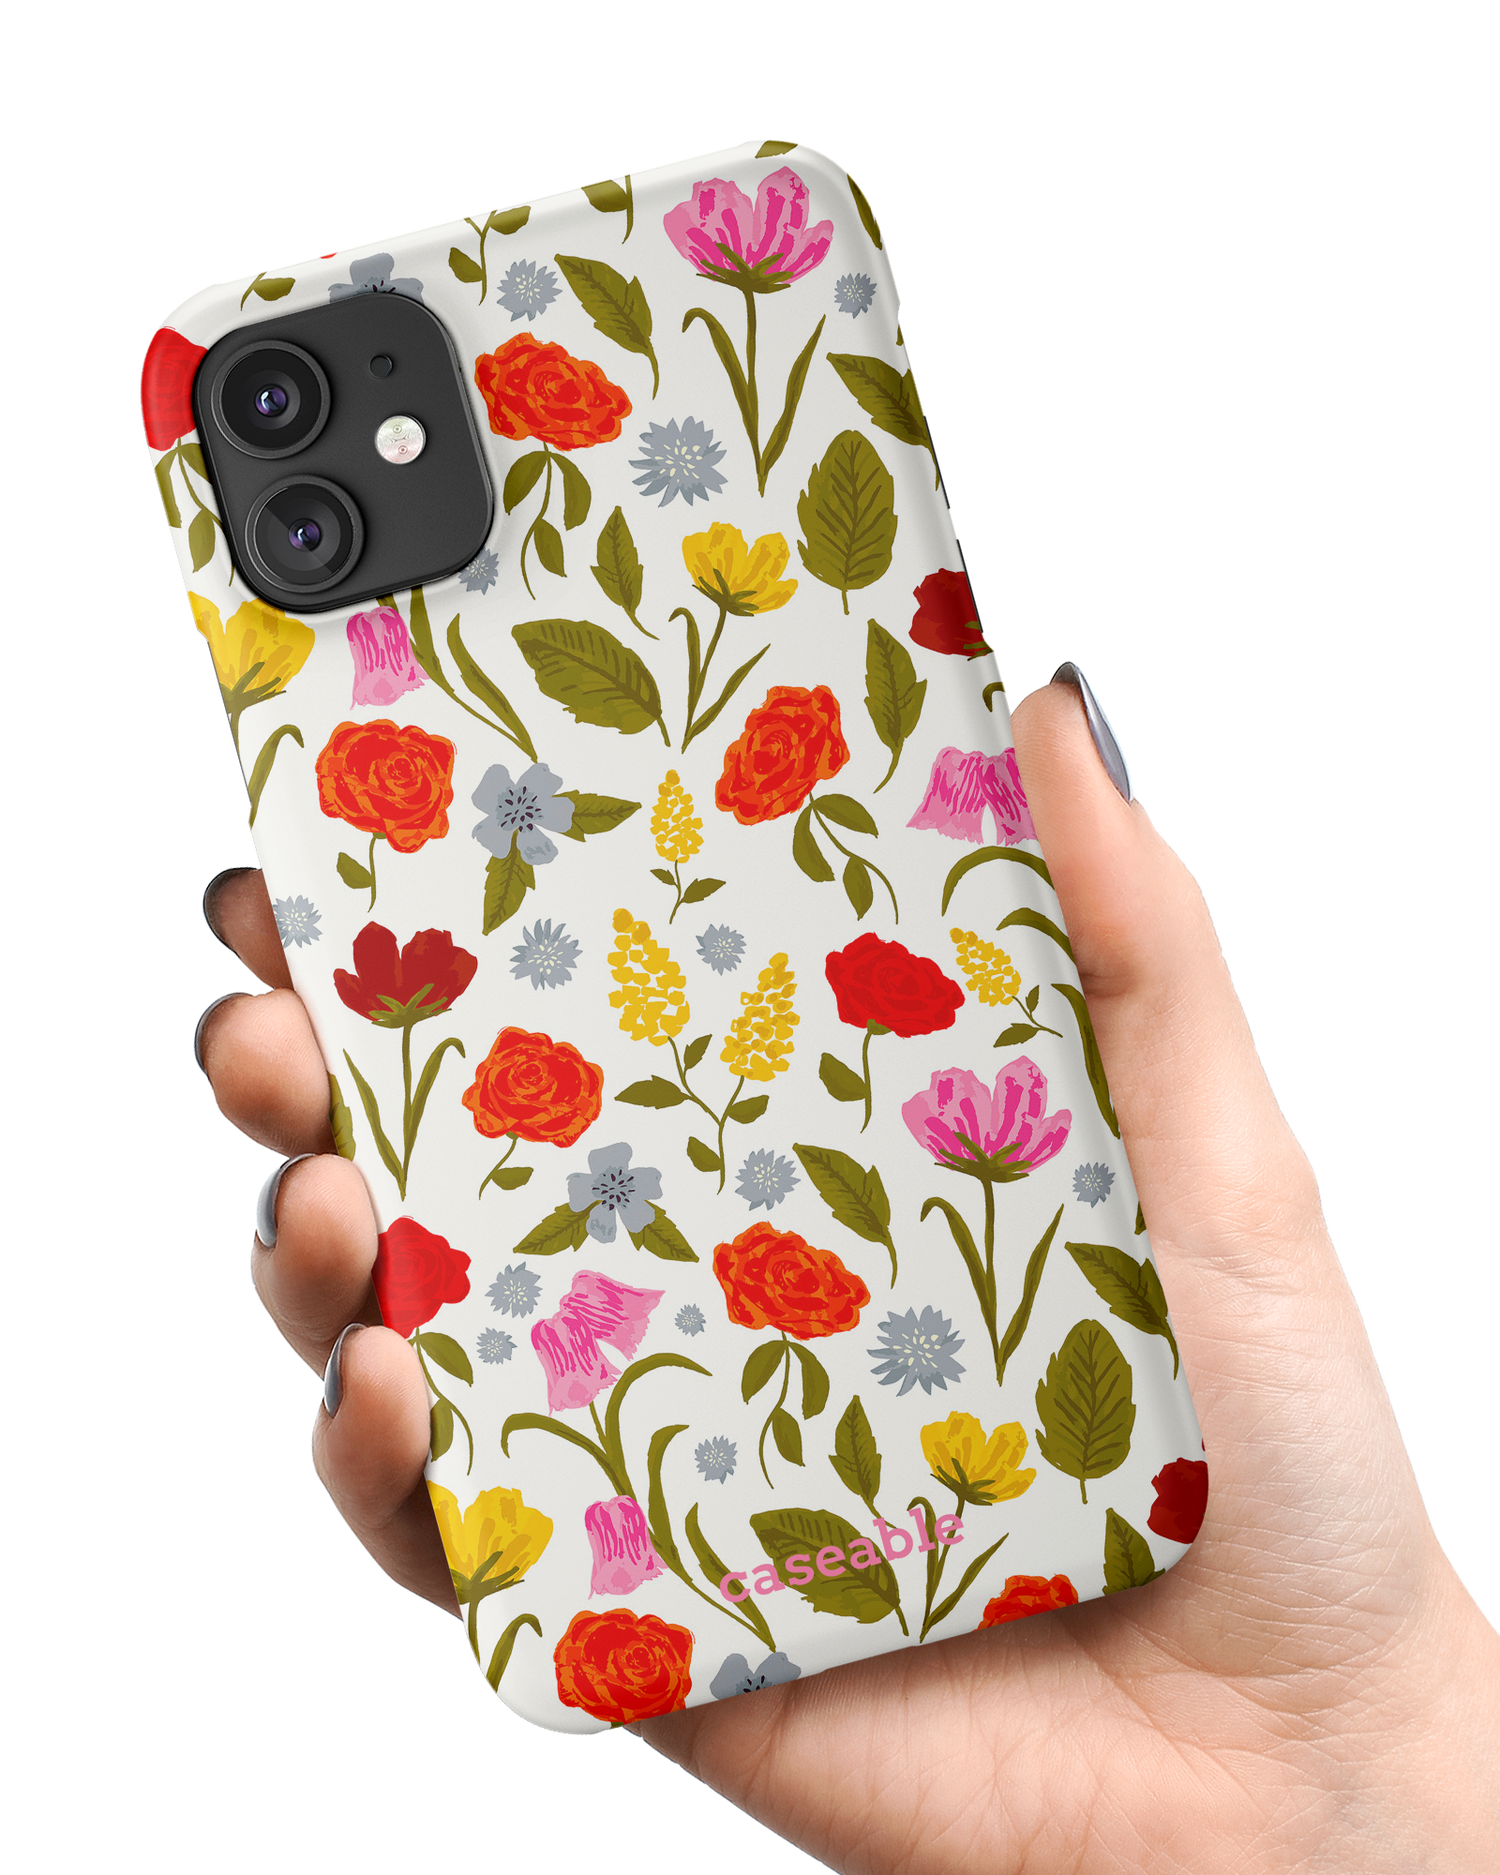 Botanical Beauties Hard Shell Phone Case Apple iPhone 11 held in hand